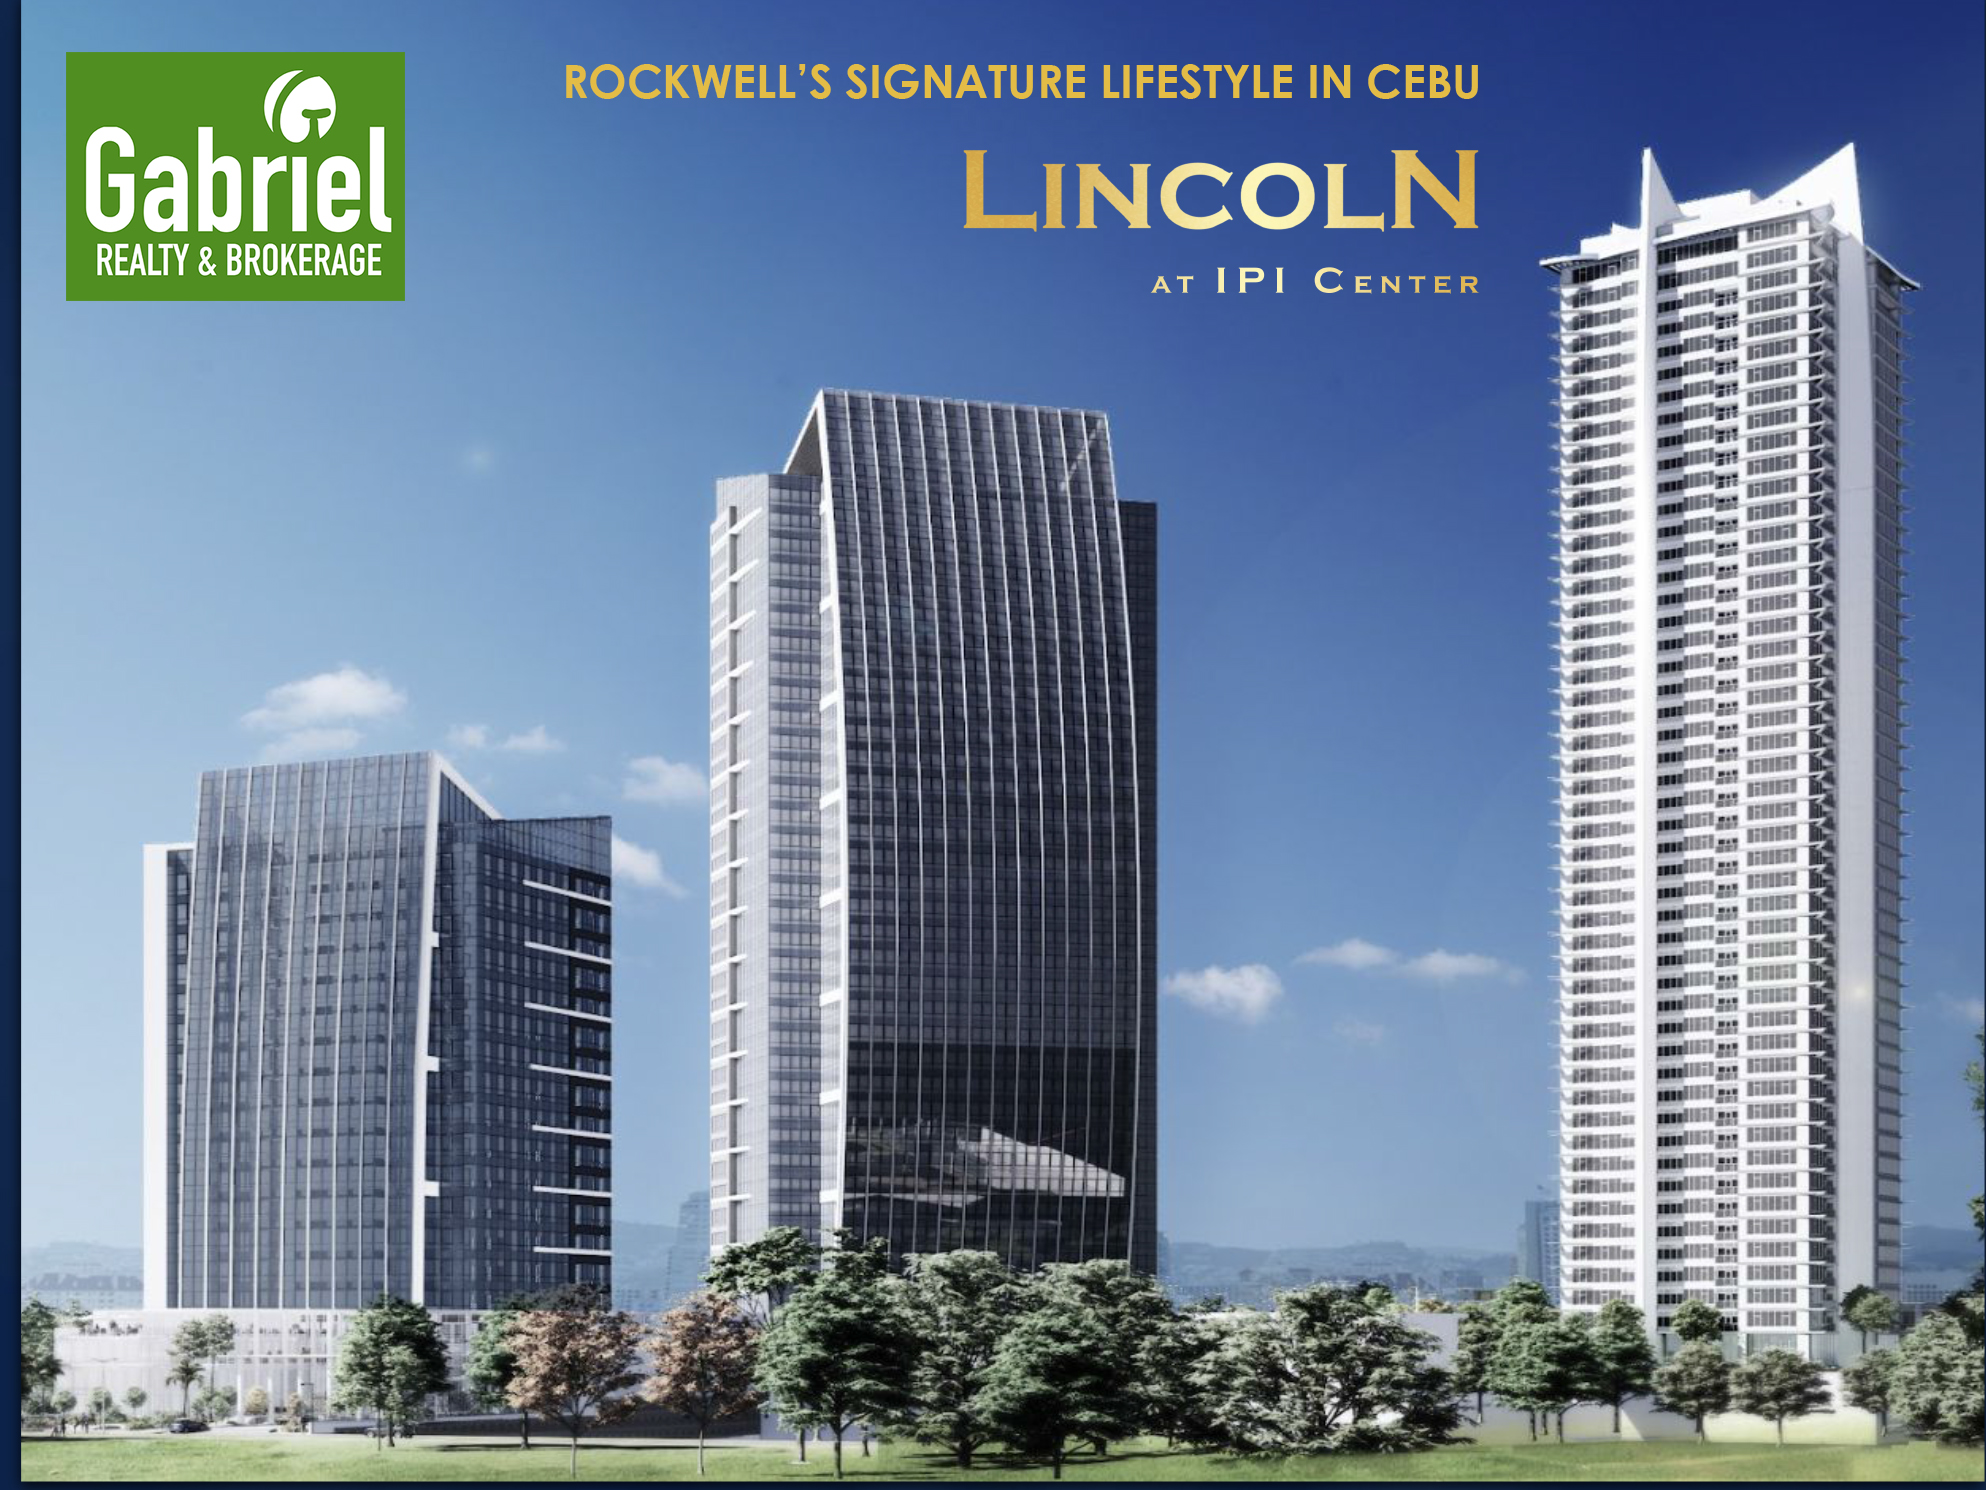 the lincoln tower at IPI center